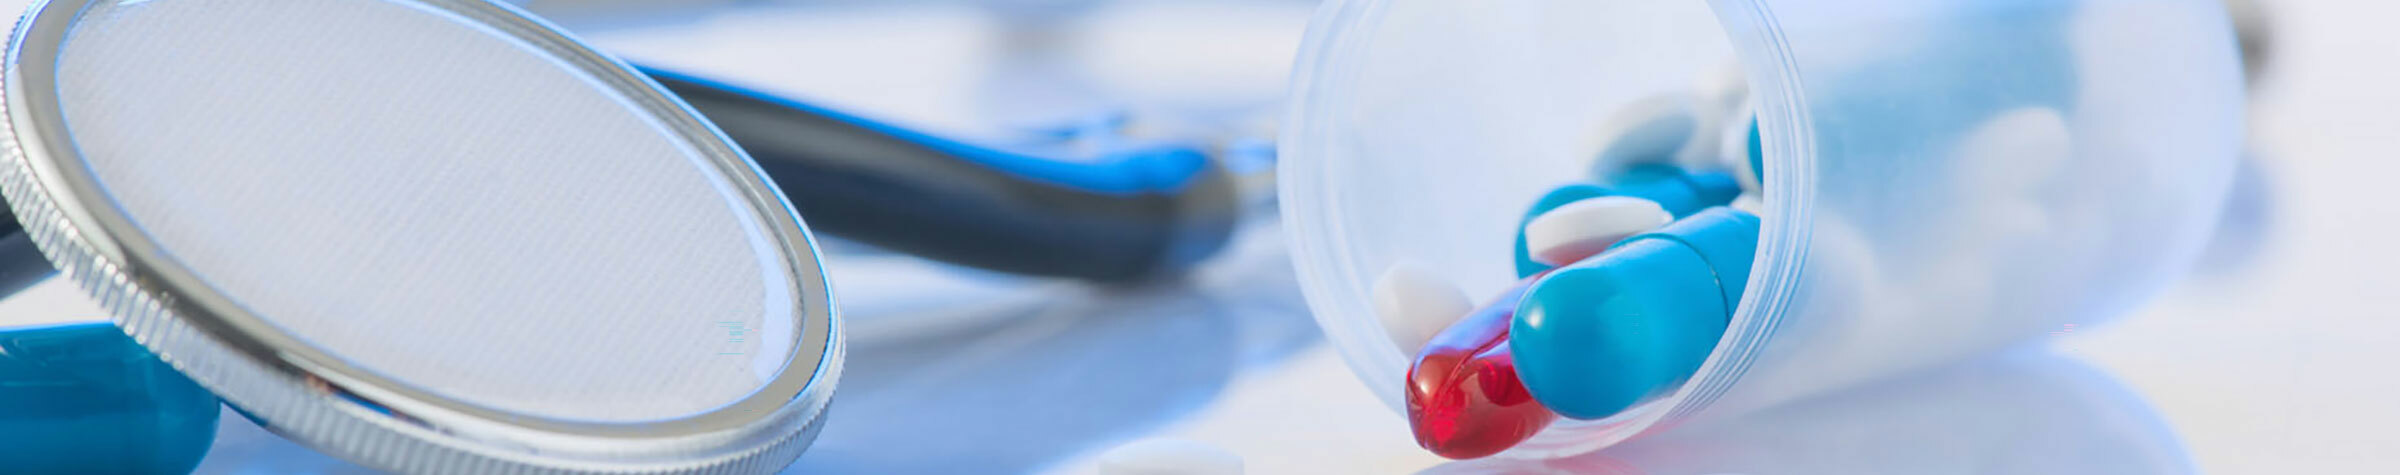 Blue stethoscope on a white surface next to a pill bottle with blue, white and red pills